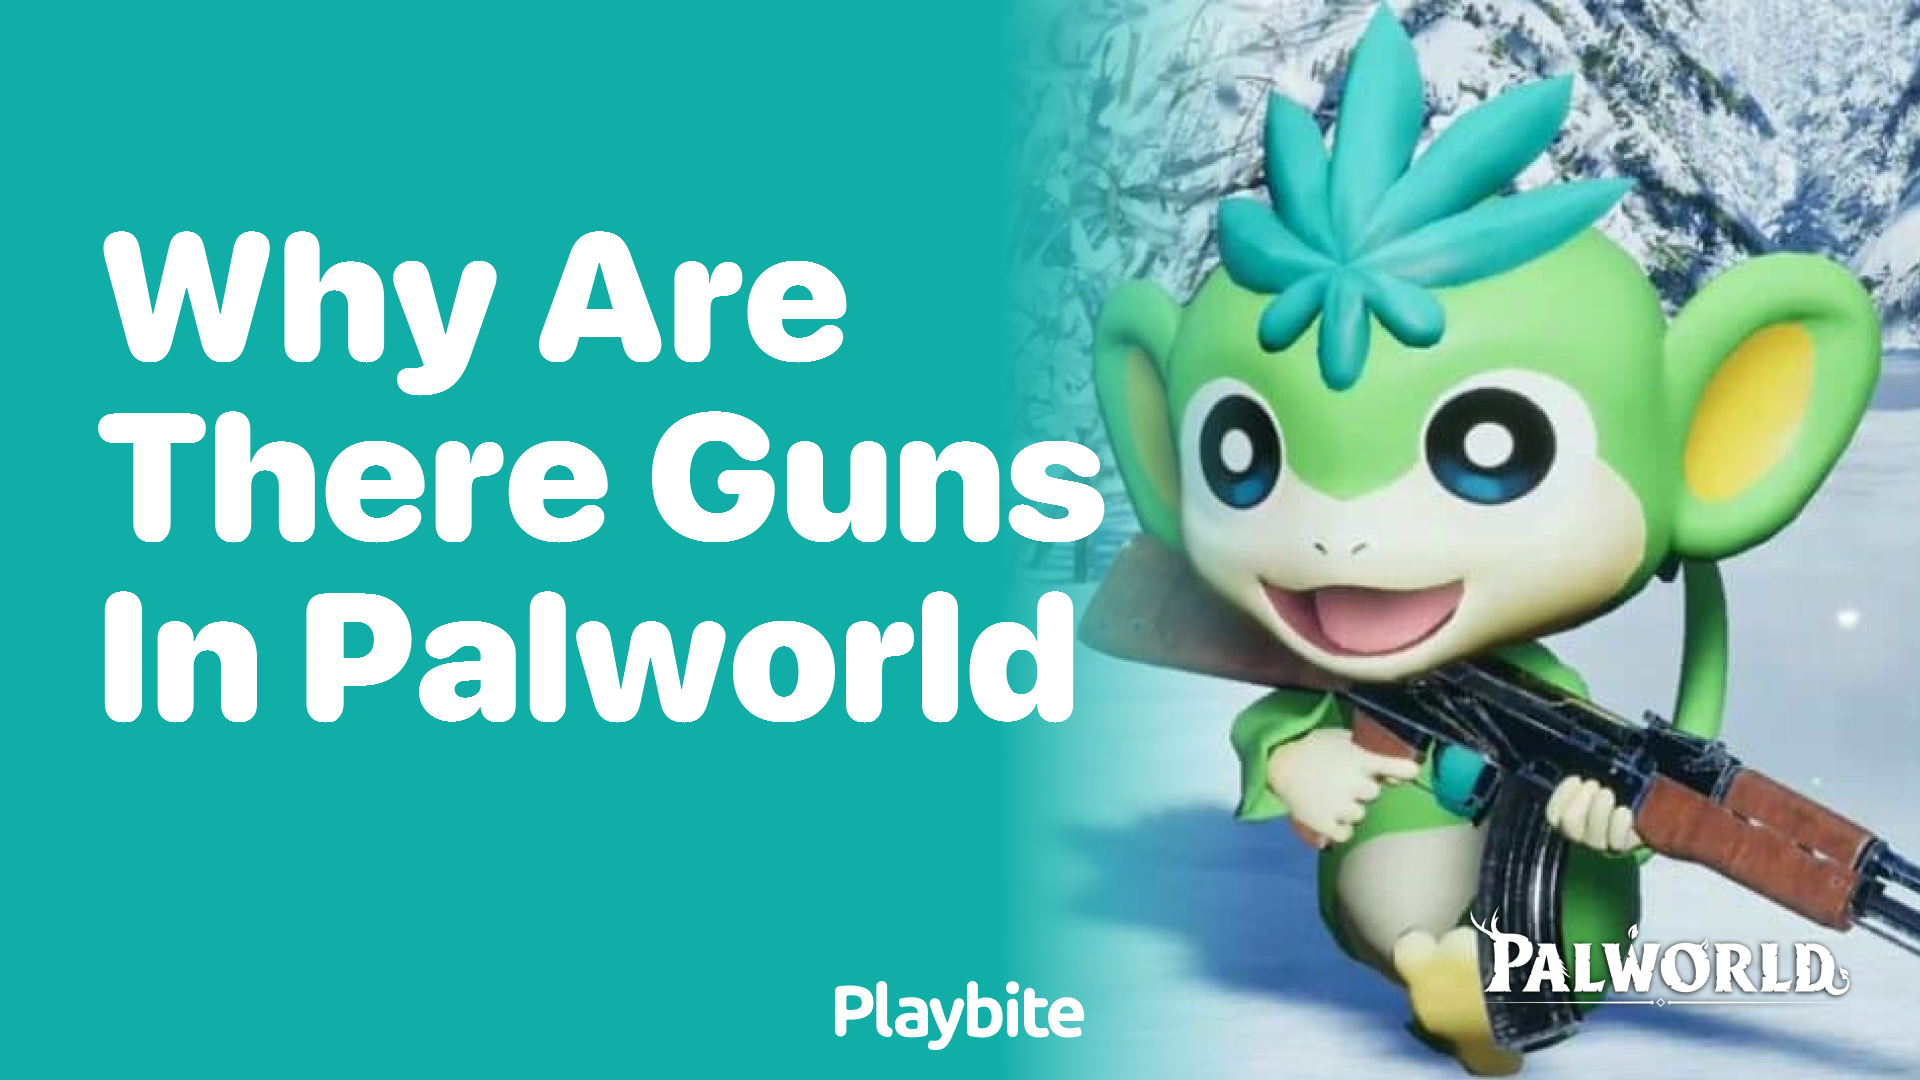 Why are there guns in Palworld?